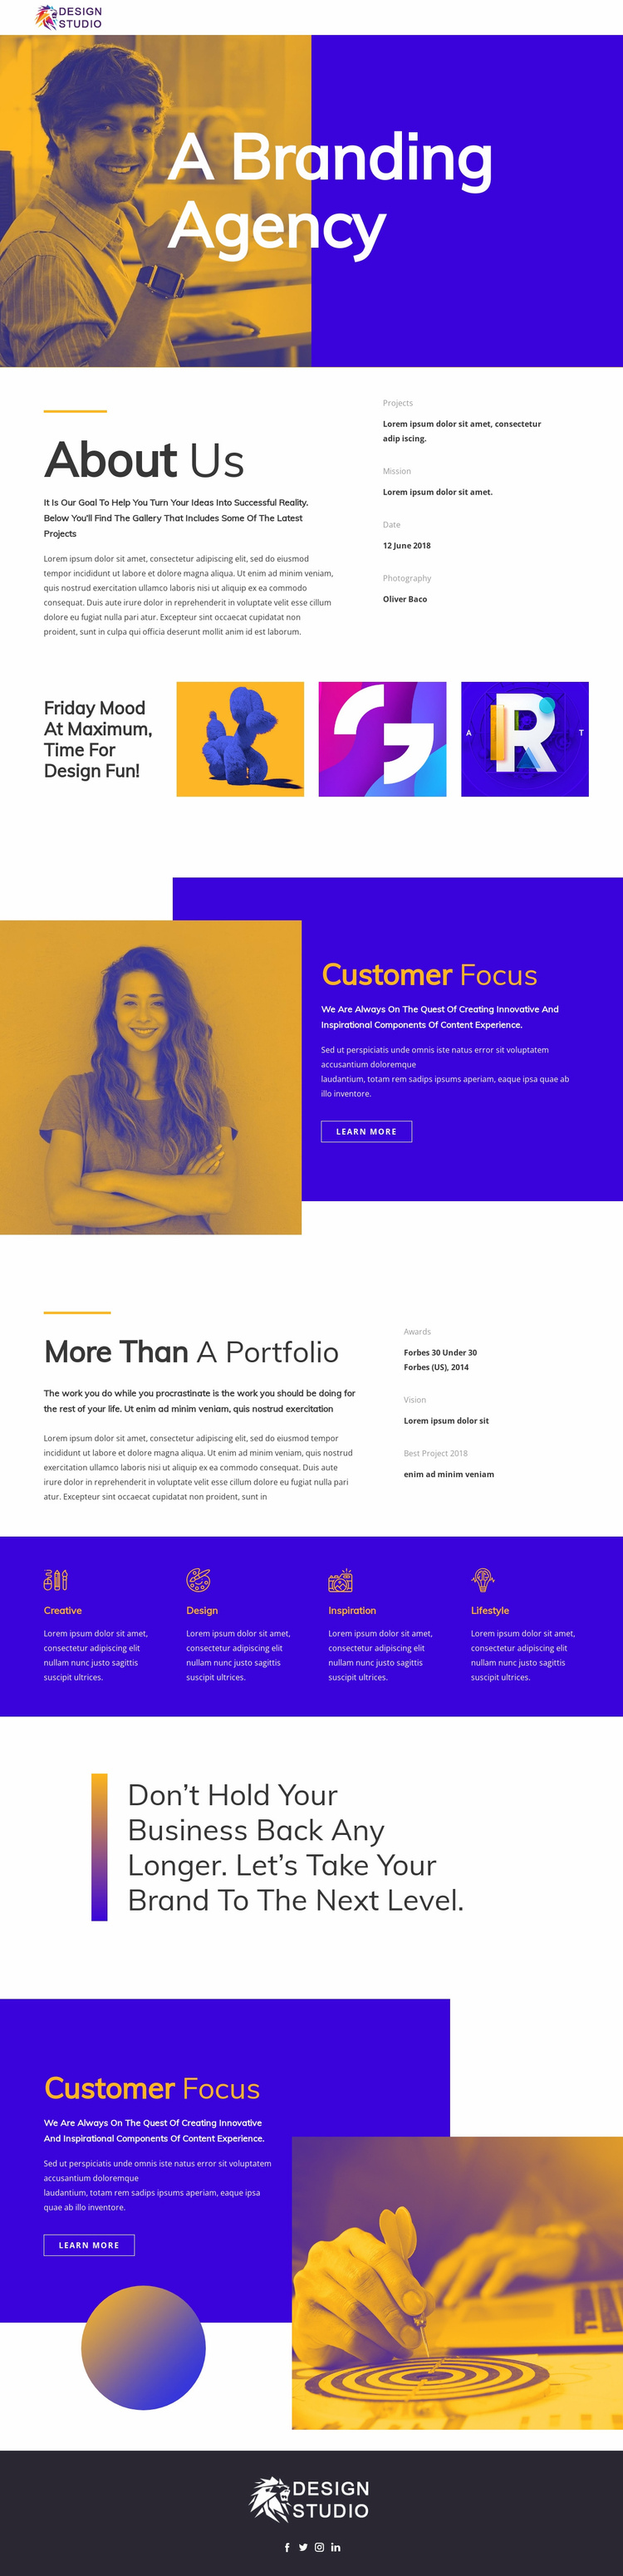 Branding agency for startup Landing Page